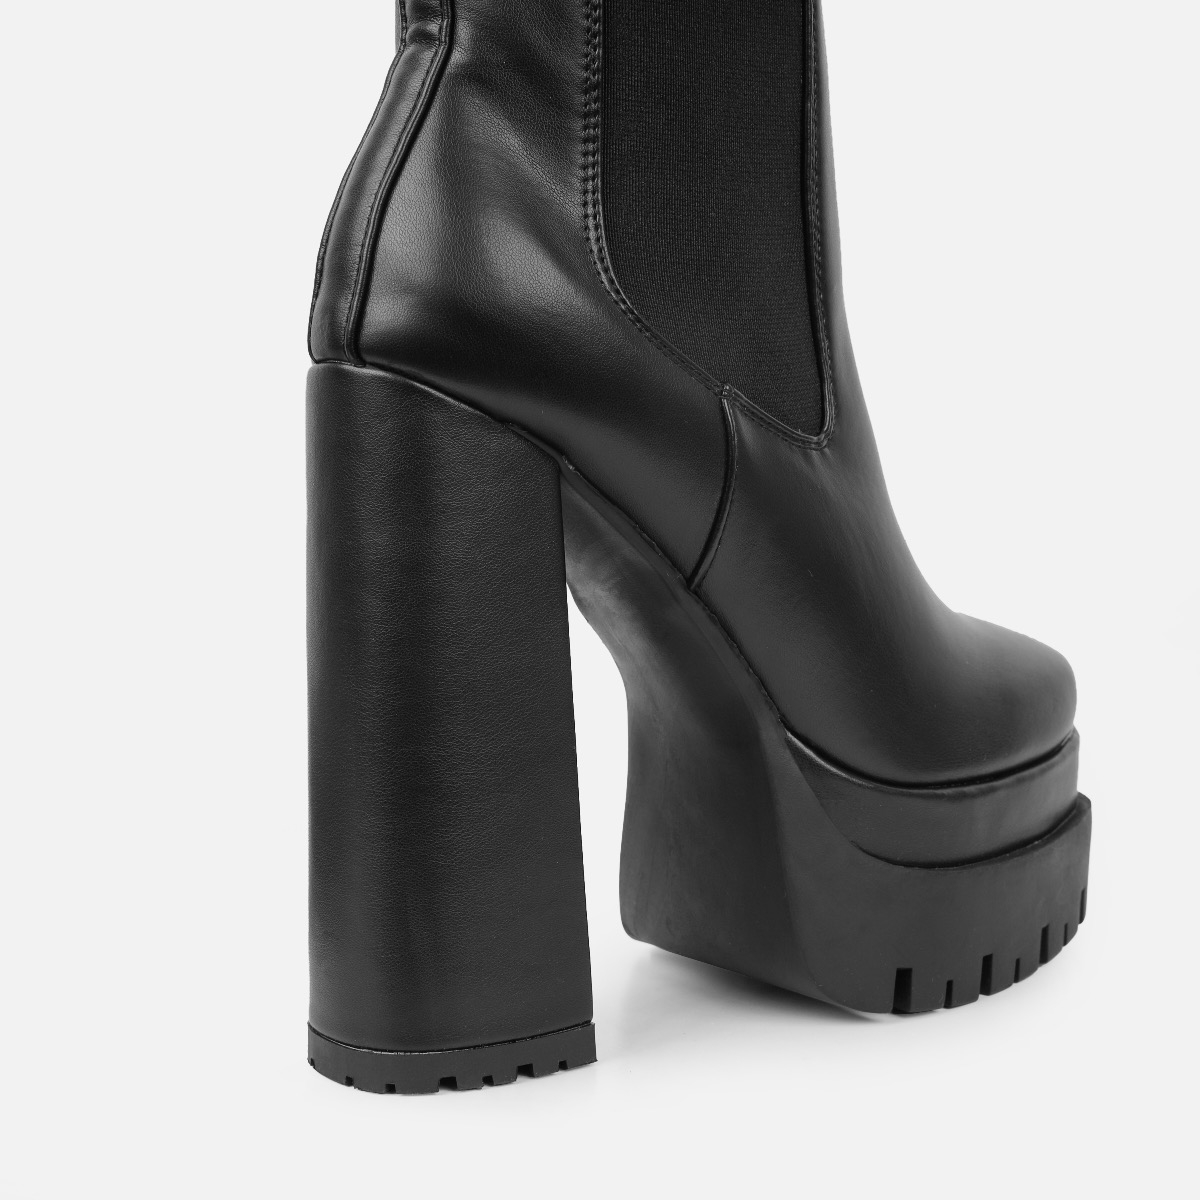 Buy VOMIRA Punk Platform Boots for Women Chunky High Heel Elastic Ankle  Boots Black Block Heel Party Boots, 4black Pu, 10 at Amazon.in